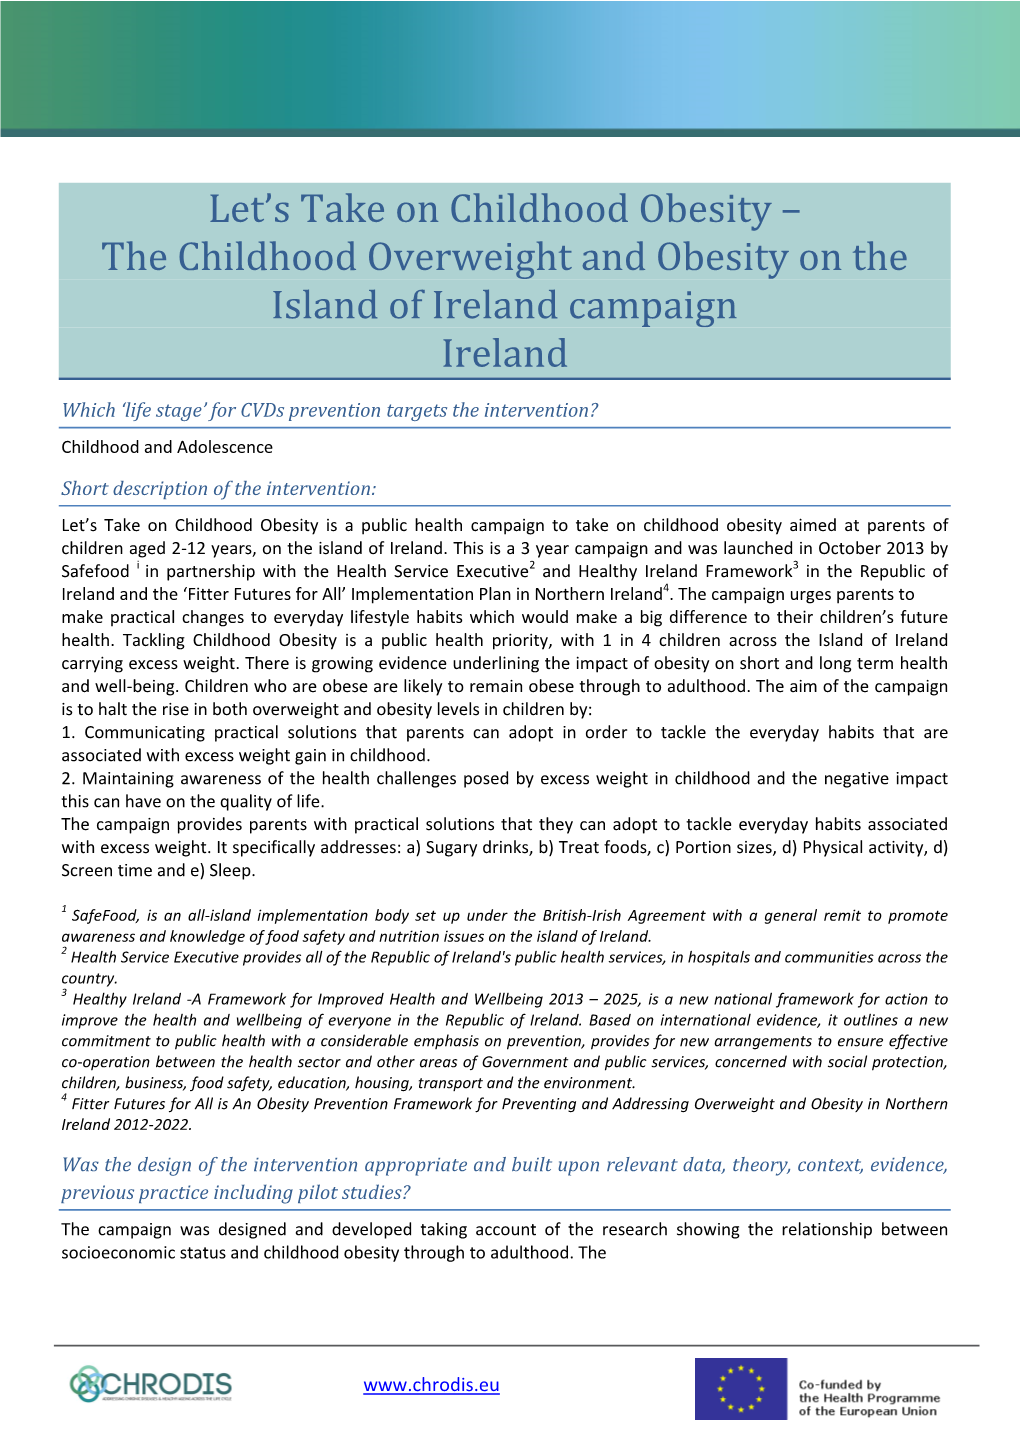 The Childhood Overweight and Obesity on the Island of Ireland Campaign Ireland